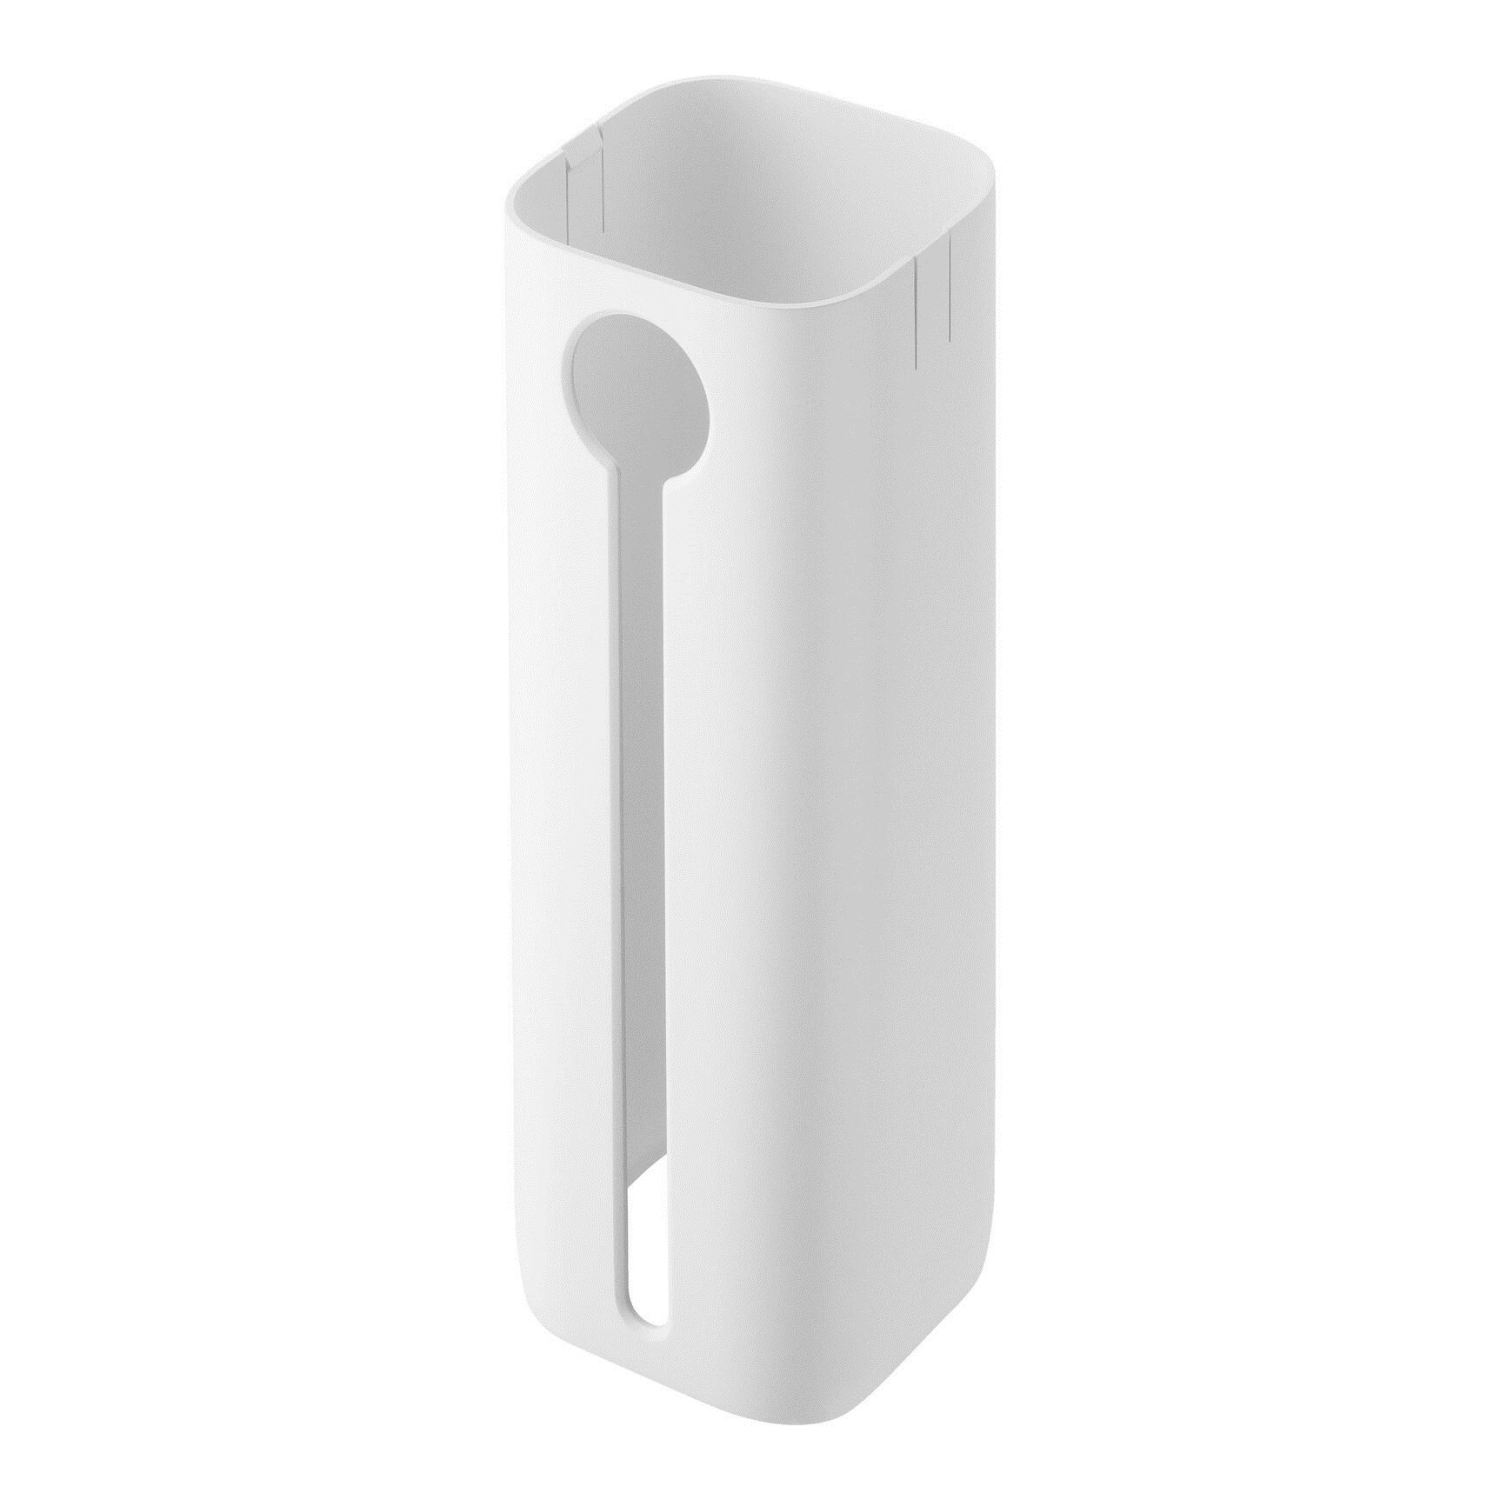 Cube cover 4s, blanc